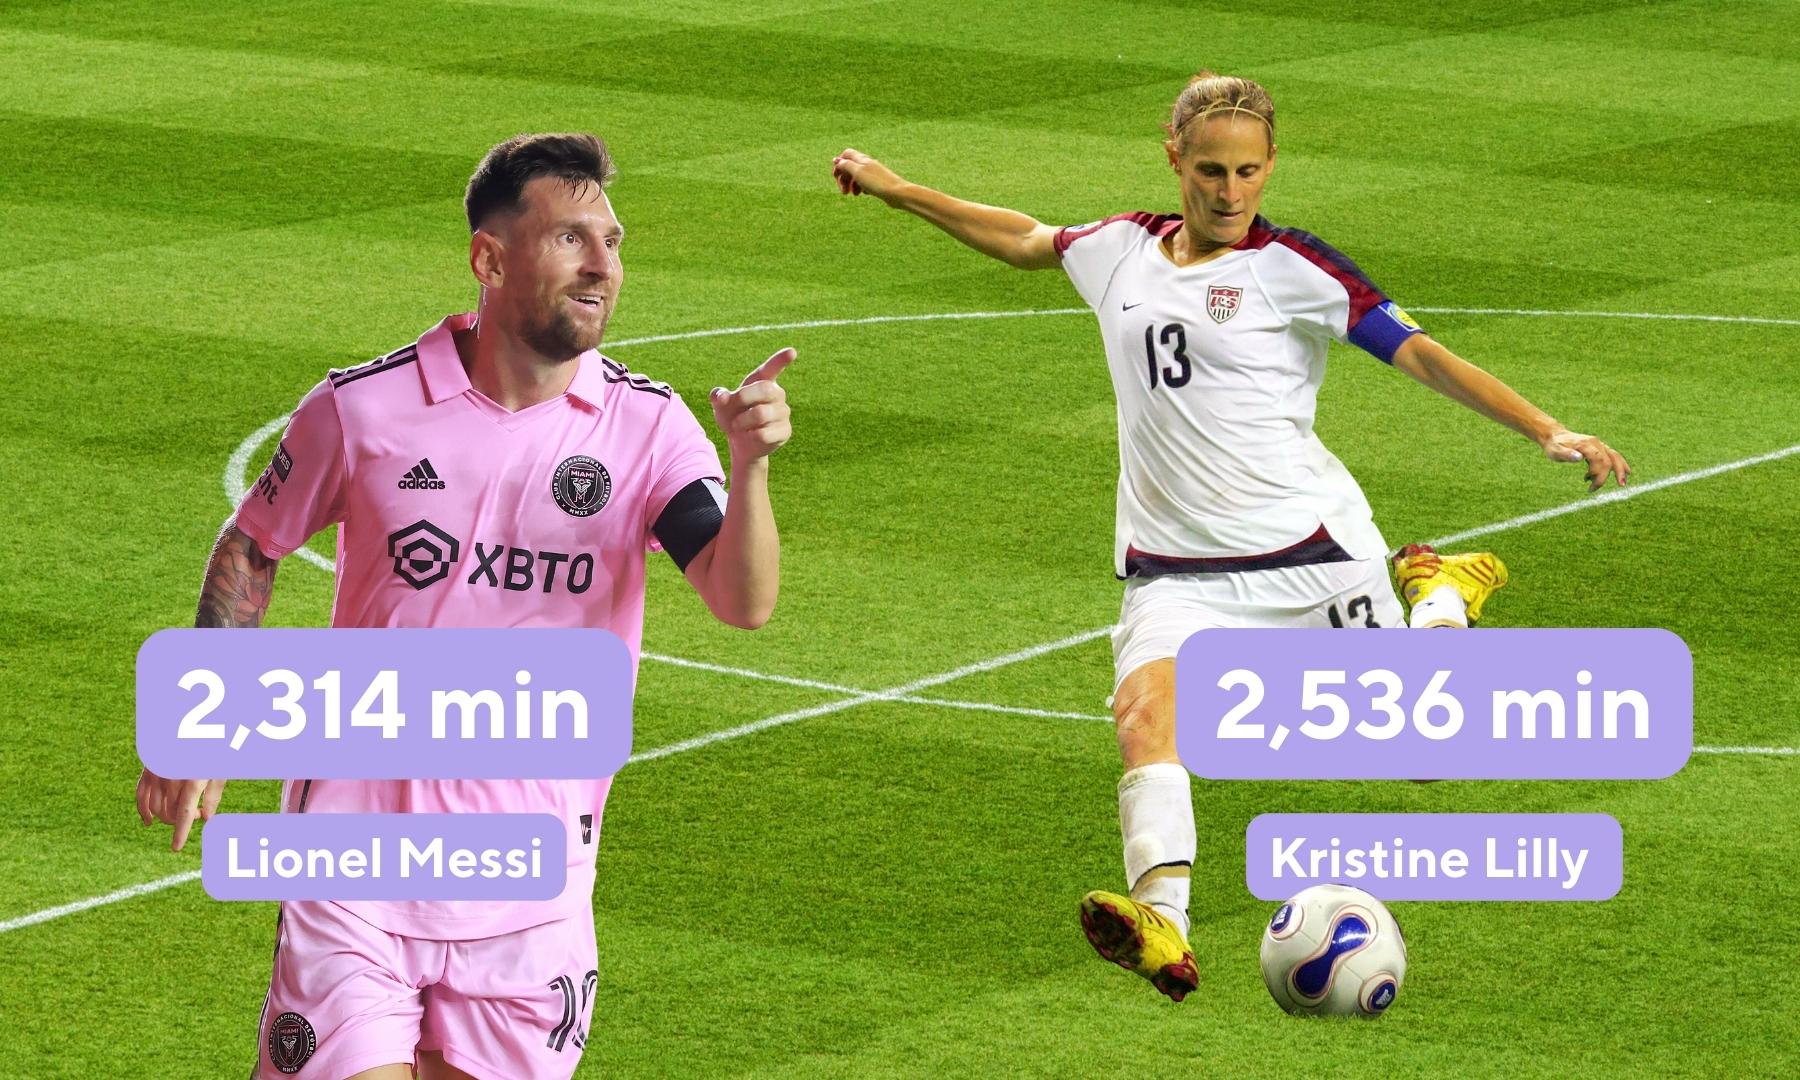 Soccer statistics of most World Cup minutes played include Messi and Kristine Lilly